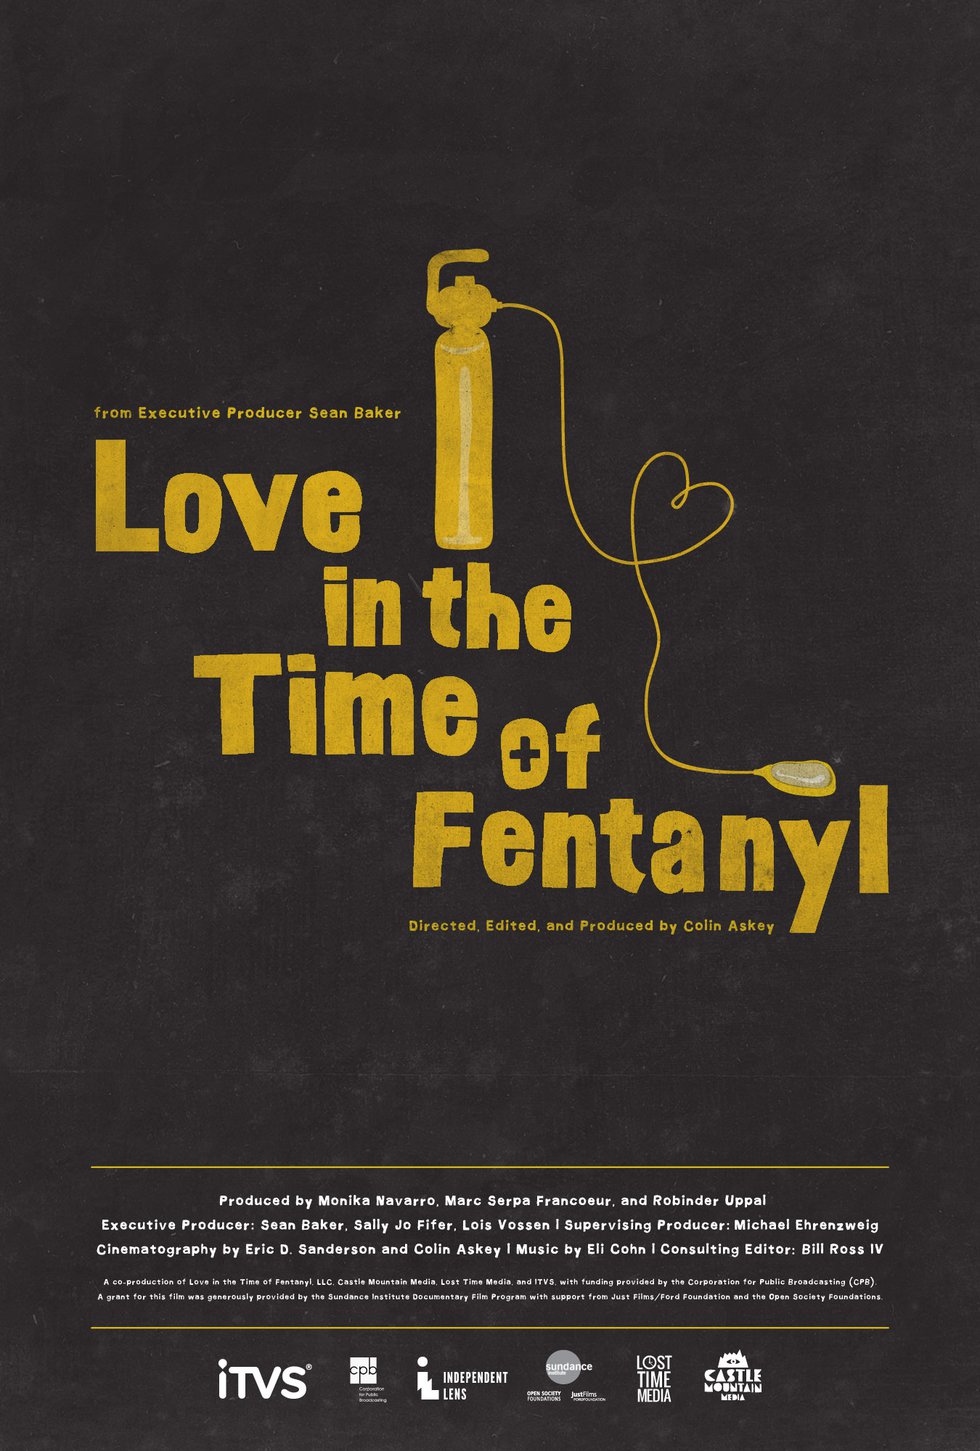 Love in the Time of Fentanyl Addiction Documentary